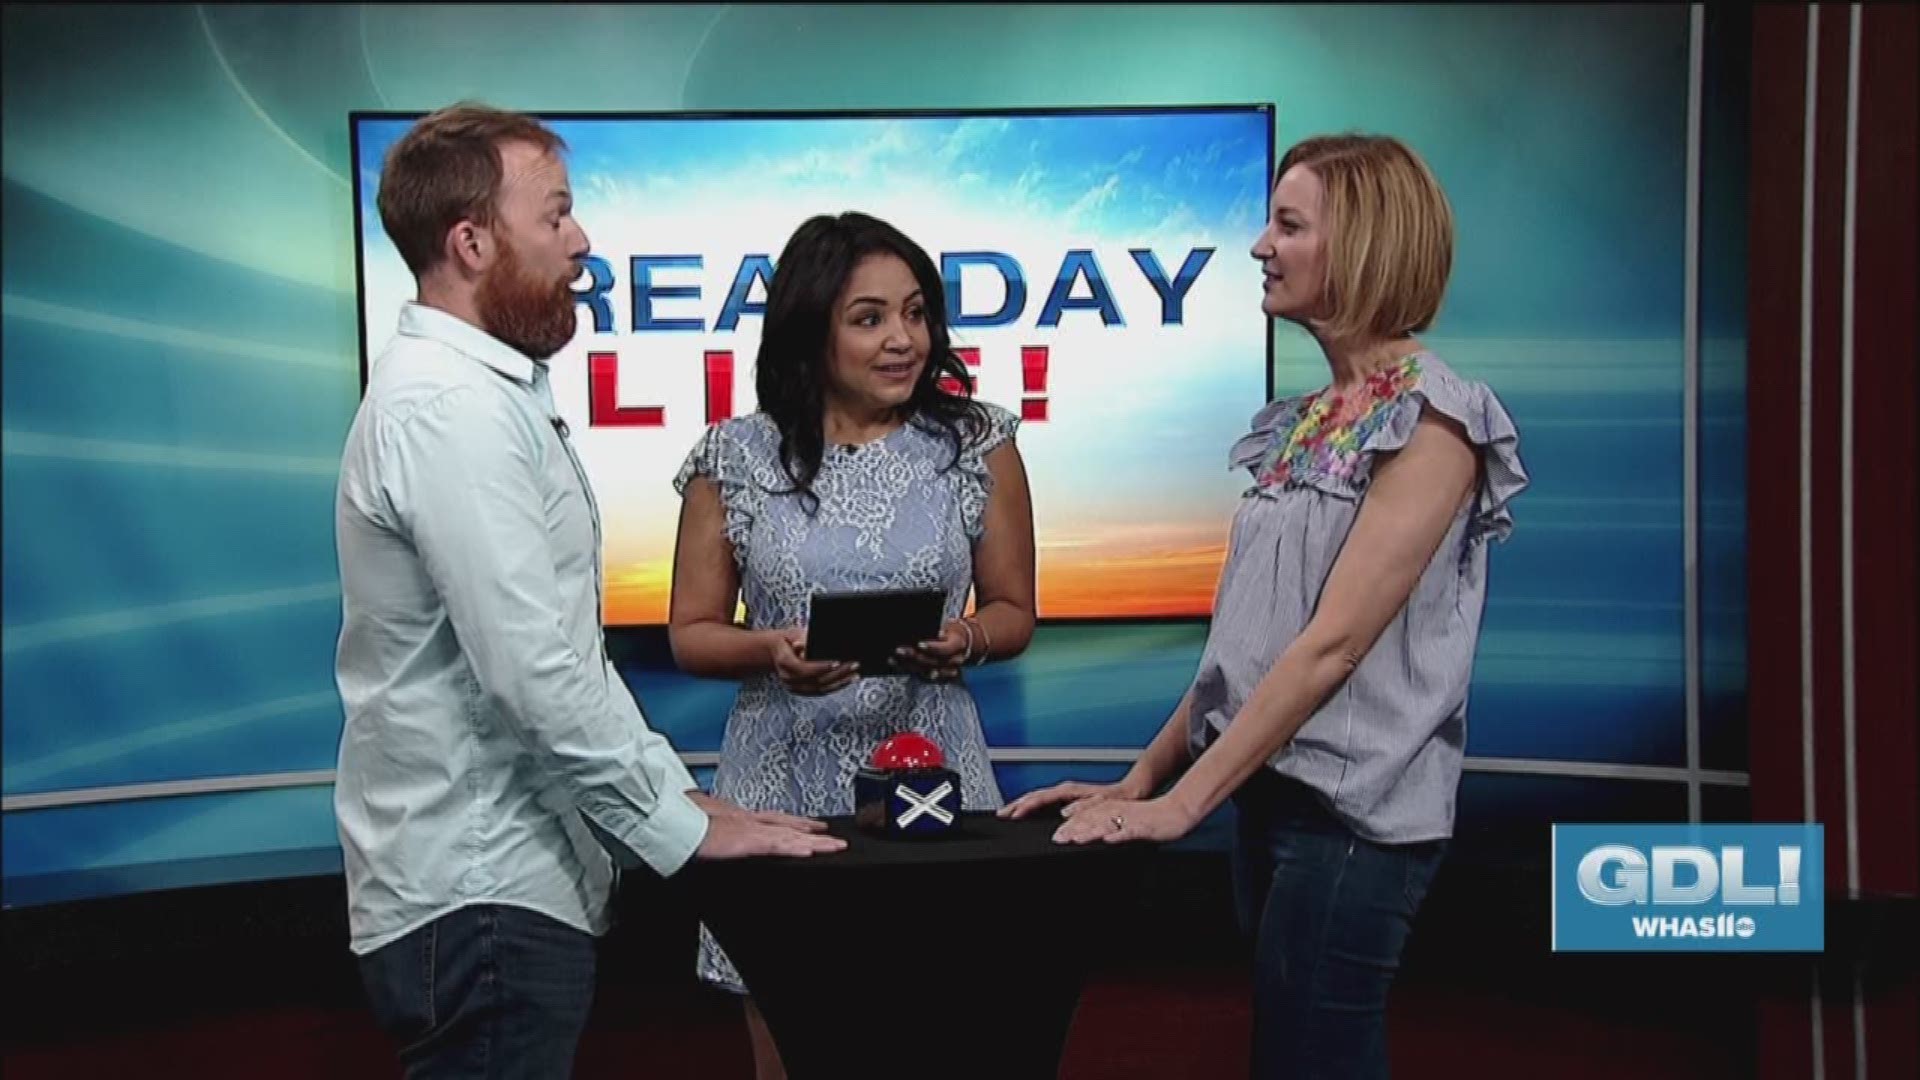 Ben Davis and Kelly K from WDJX stopped by Great Day Live to chat with Angie Fenton and she pitted them against each other and put them to the test.